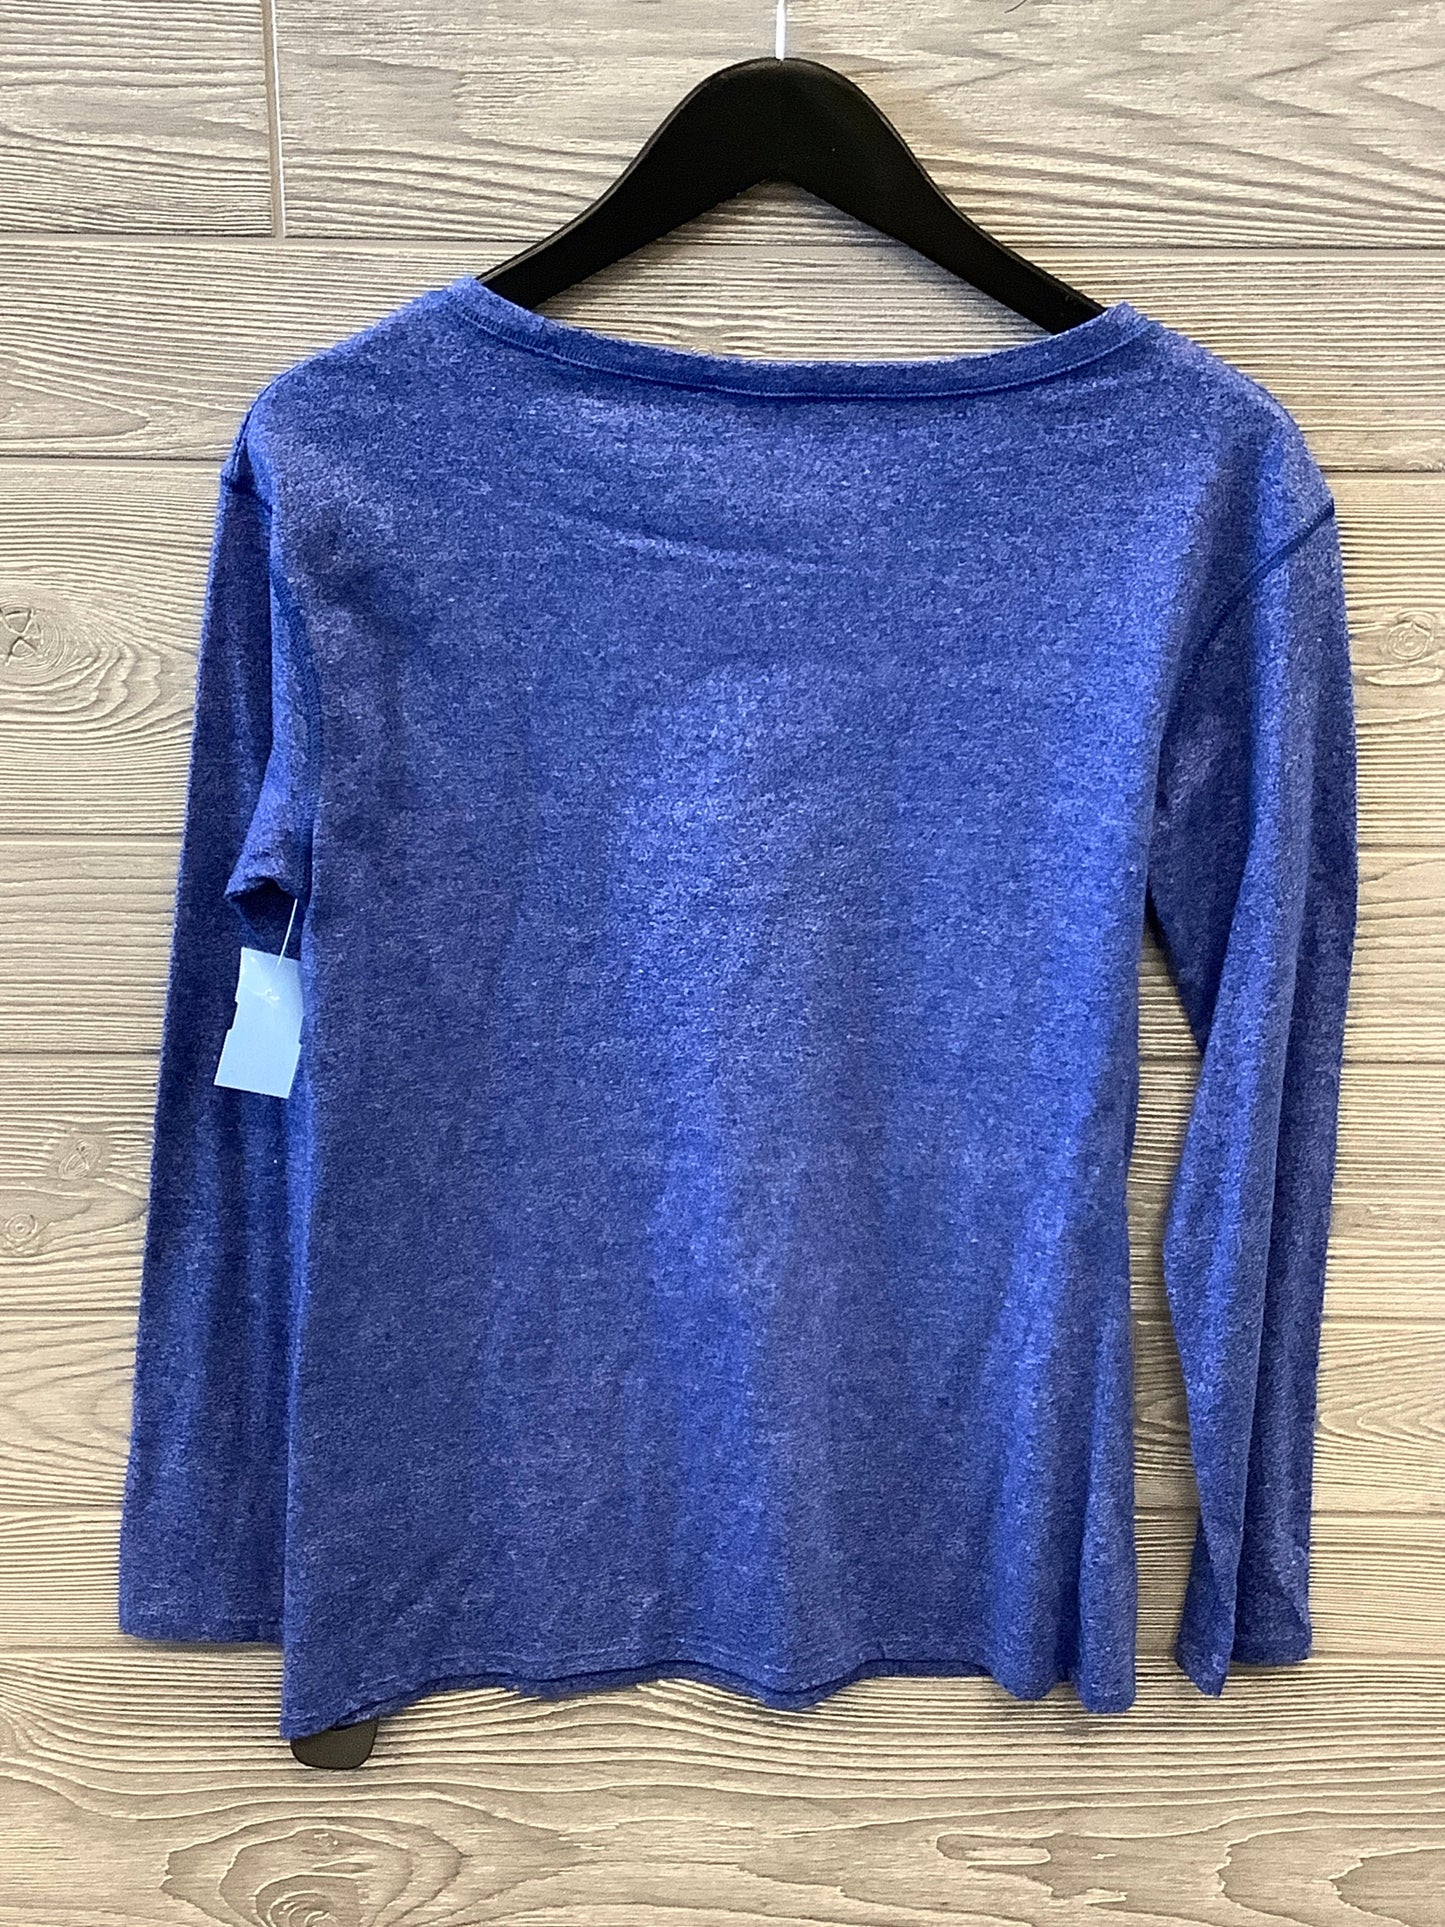 Athletic Top Long Sleeve Crewneck By Adidas  Size: S